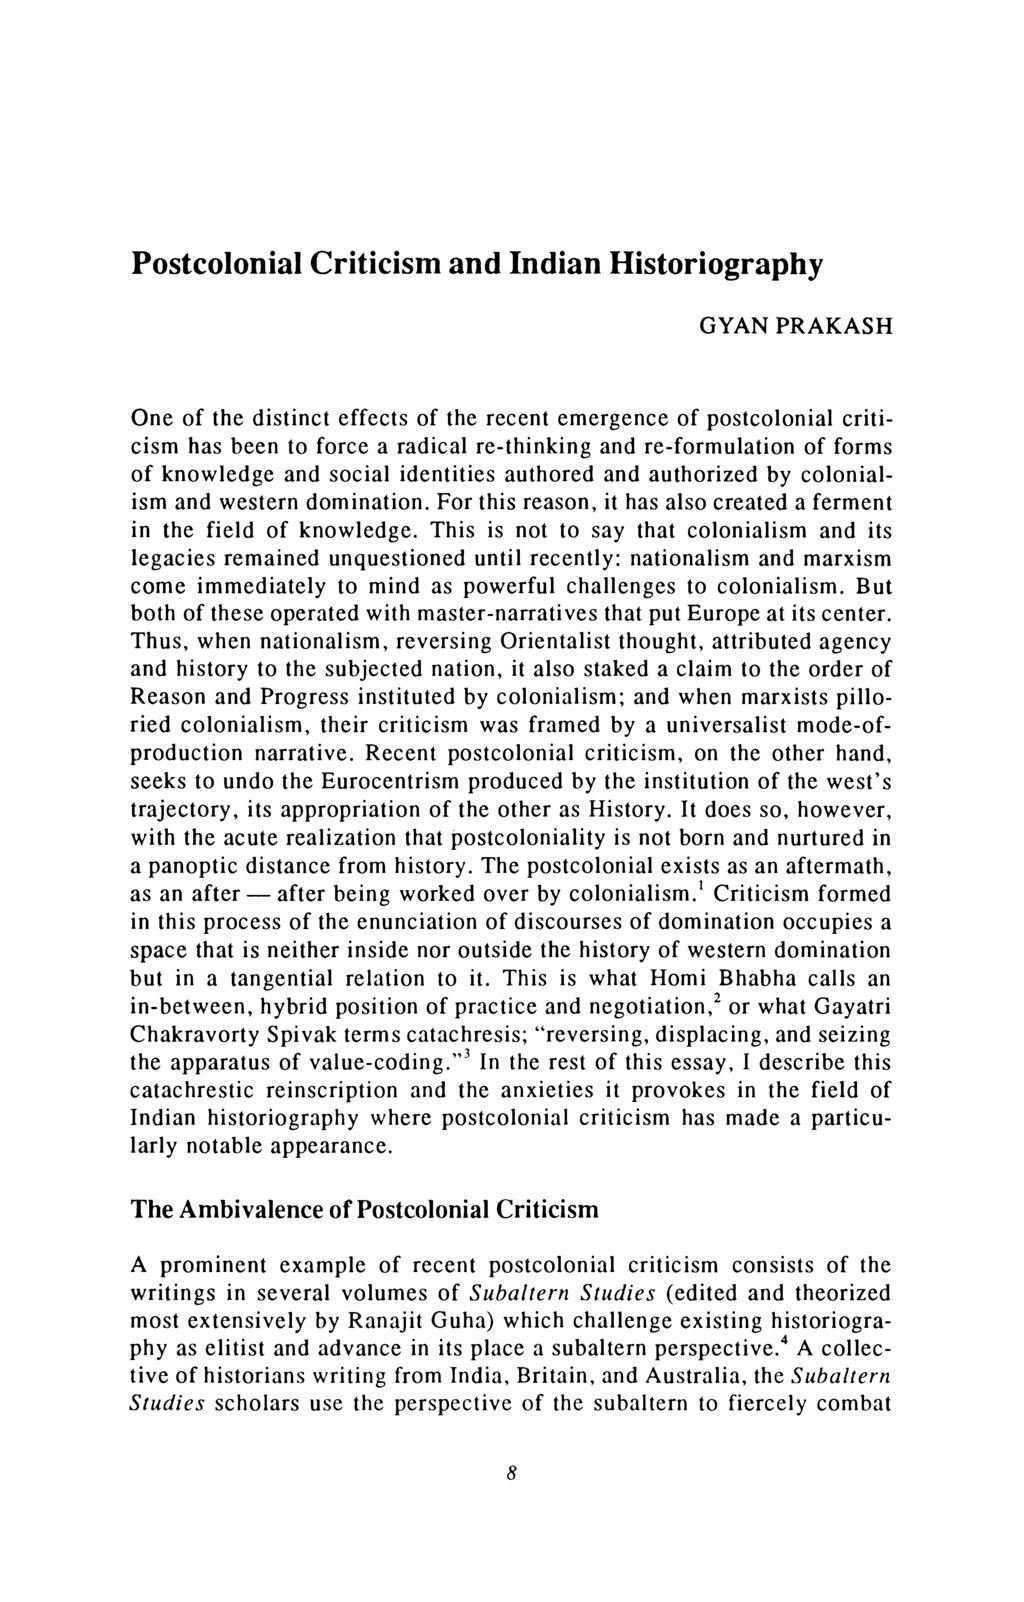 Postcolonial Criticism and Indian Historiography GYAN PRAKASH One of the distinct effects of the recent emergence of postcolonial criticism has been to force a radical re-thinking and re-formulation